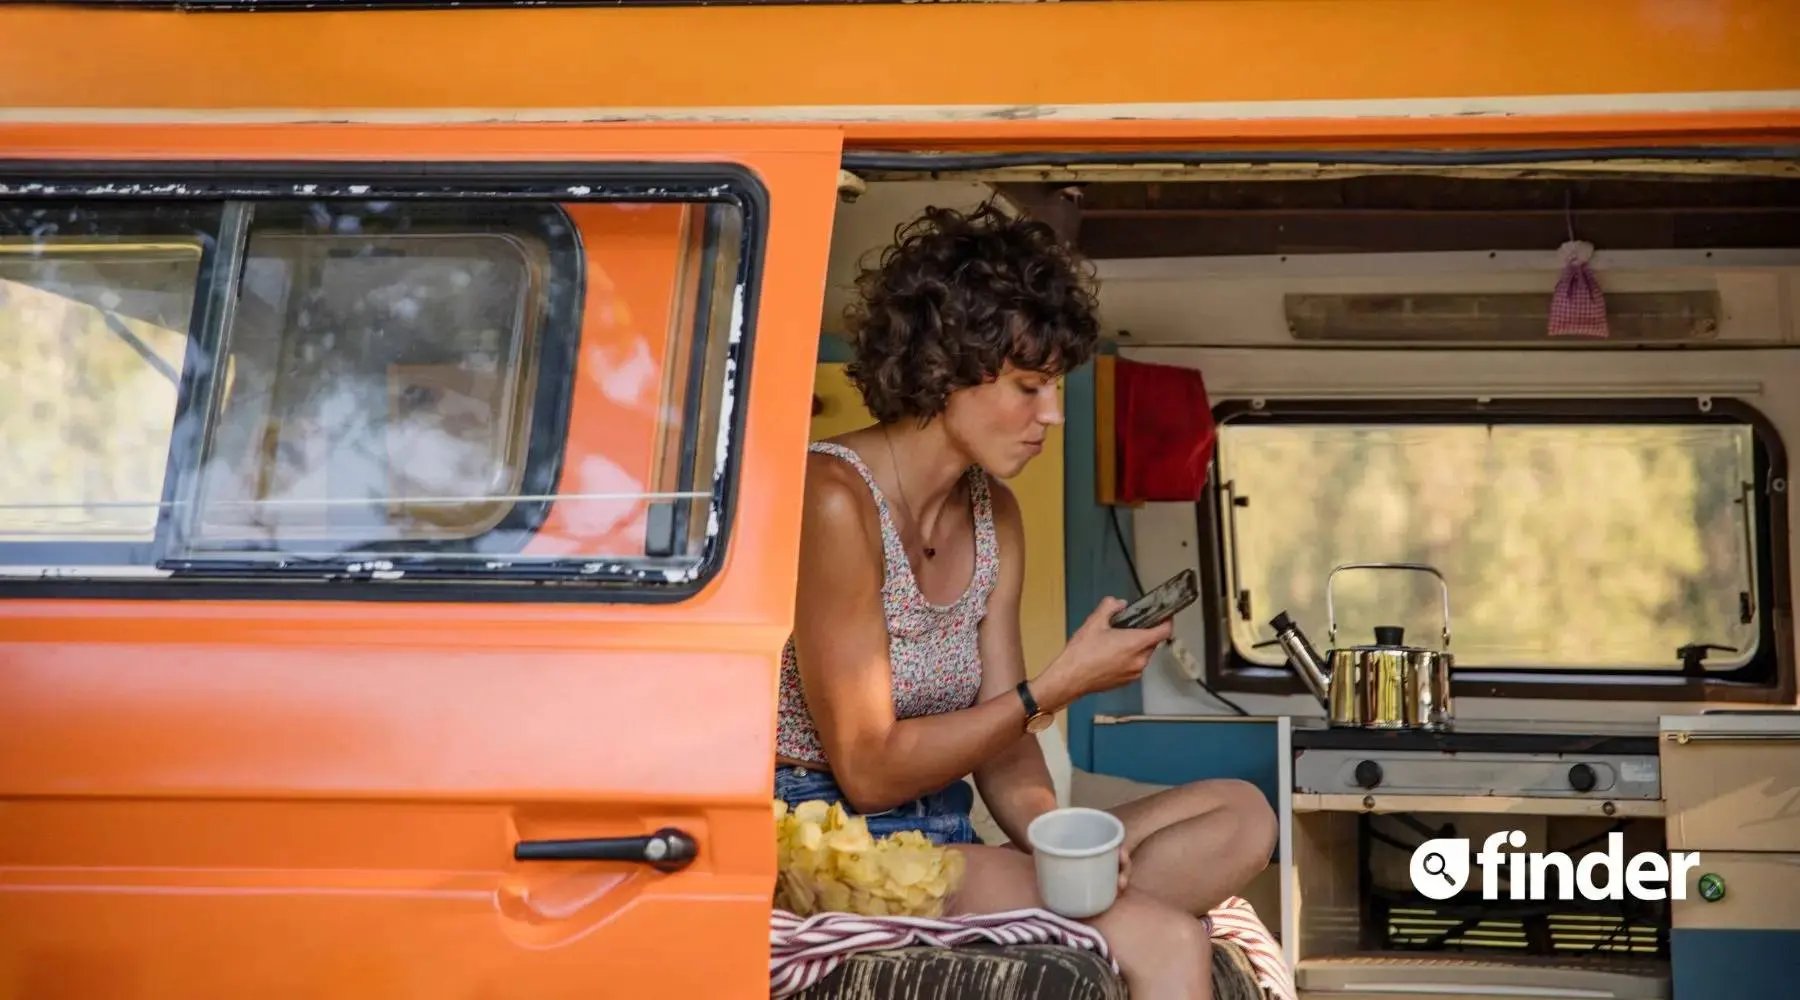 Woman-in-Campervan_Canva_1800x1000